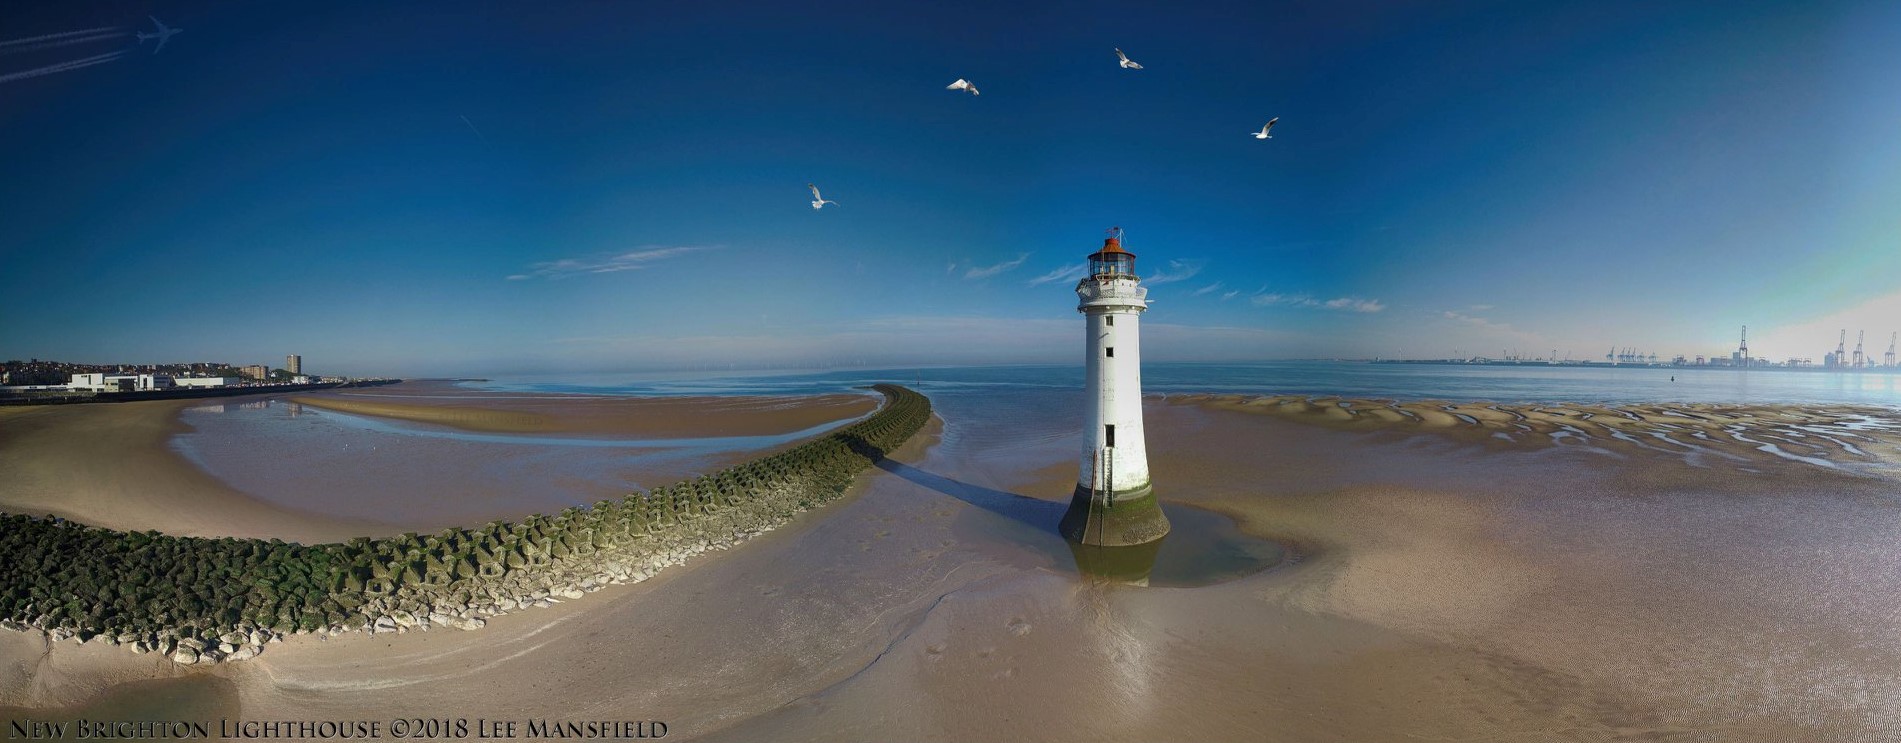 New Brighton Lighthouse or Perch Rock Lighthouse